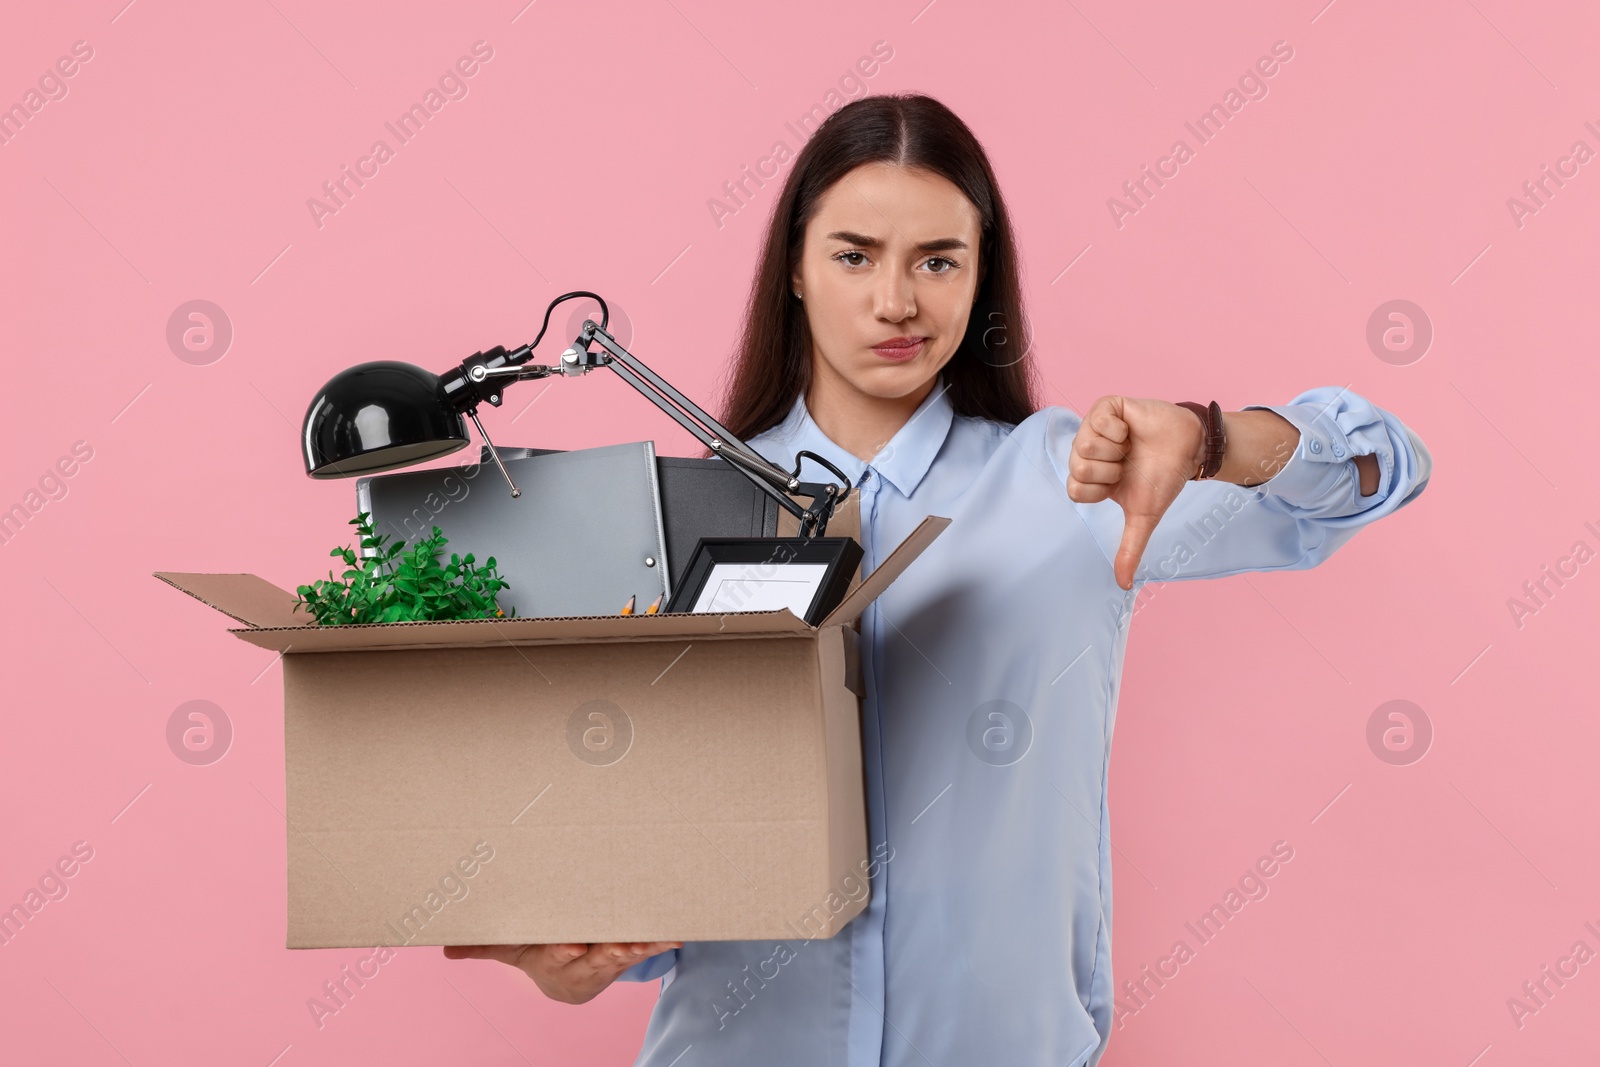 Photo of Unemployment problem. Unhappy woman with box of personal office belongings showing thumbs down on pink background